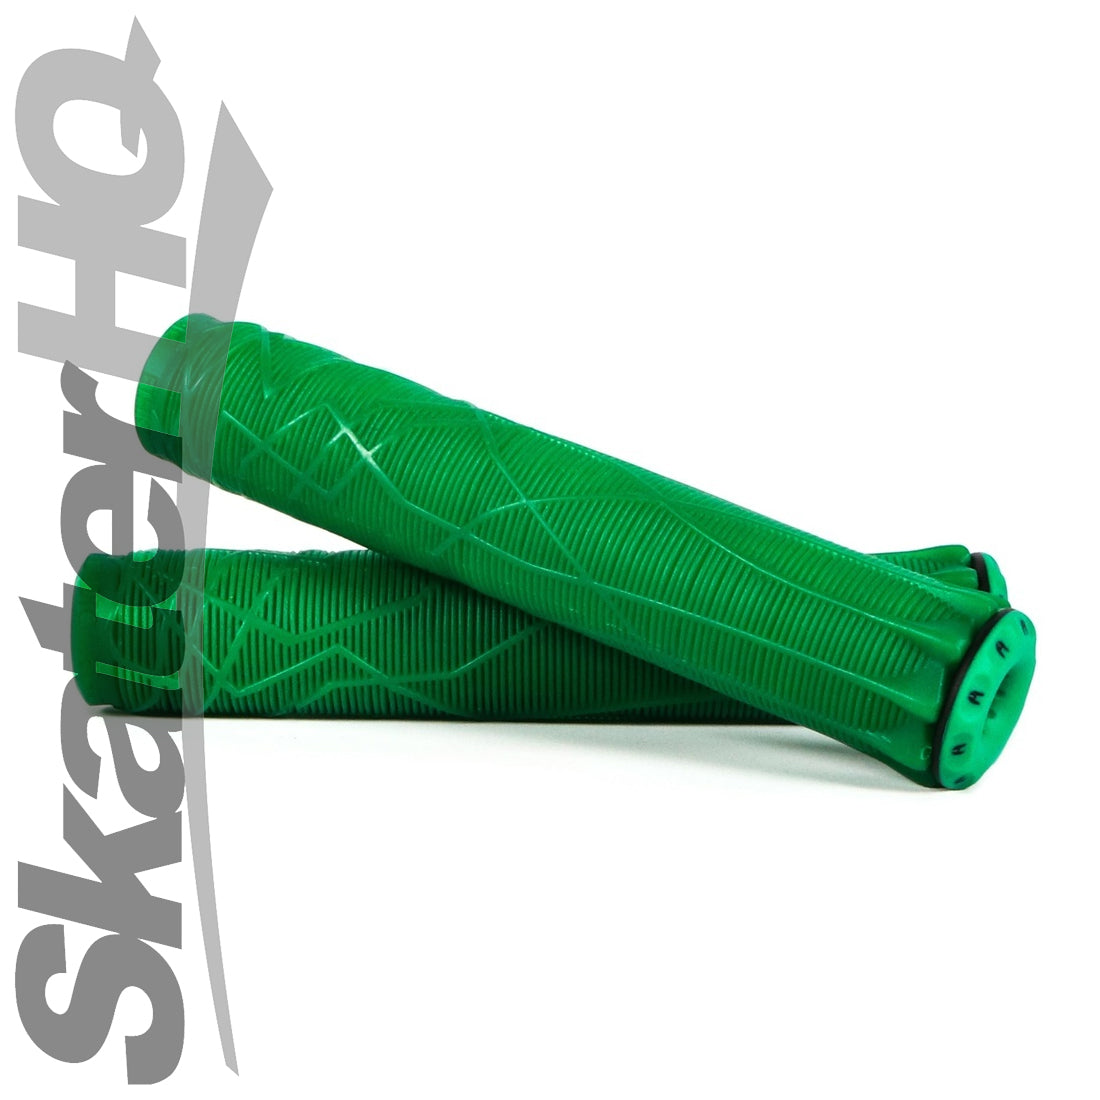 Ethic DTC Handle Grips - Green Scooter Grips